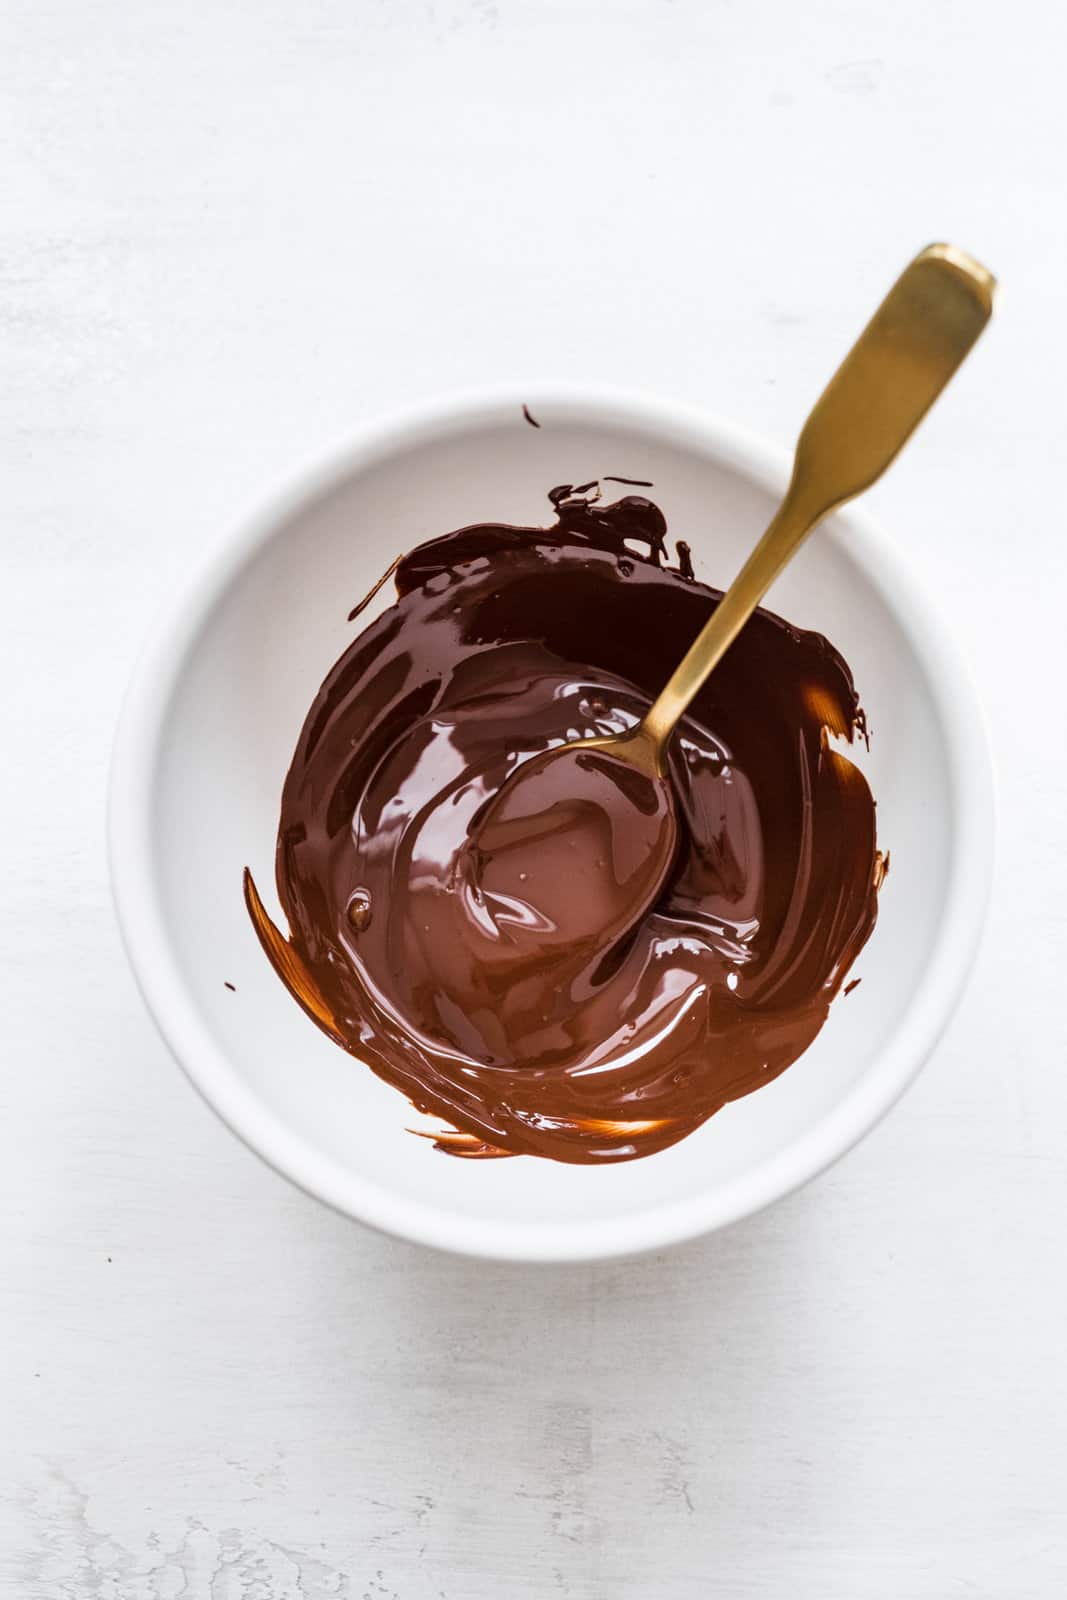 Melted chocolate in bowl.